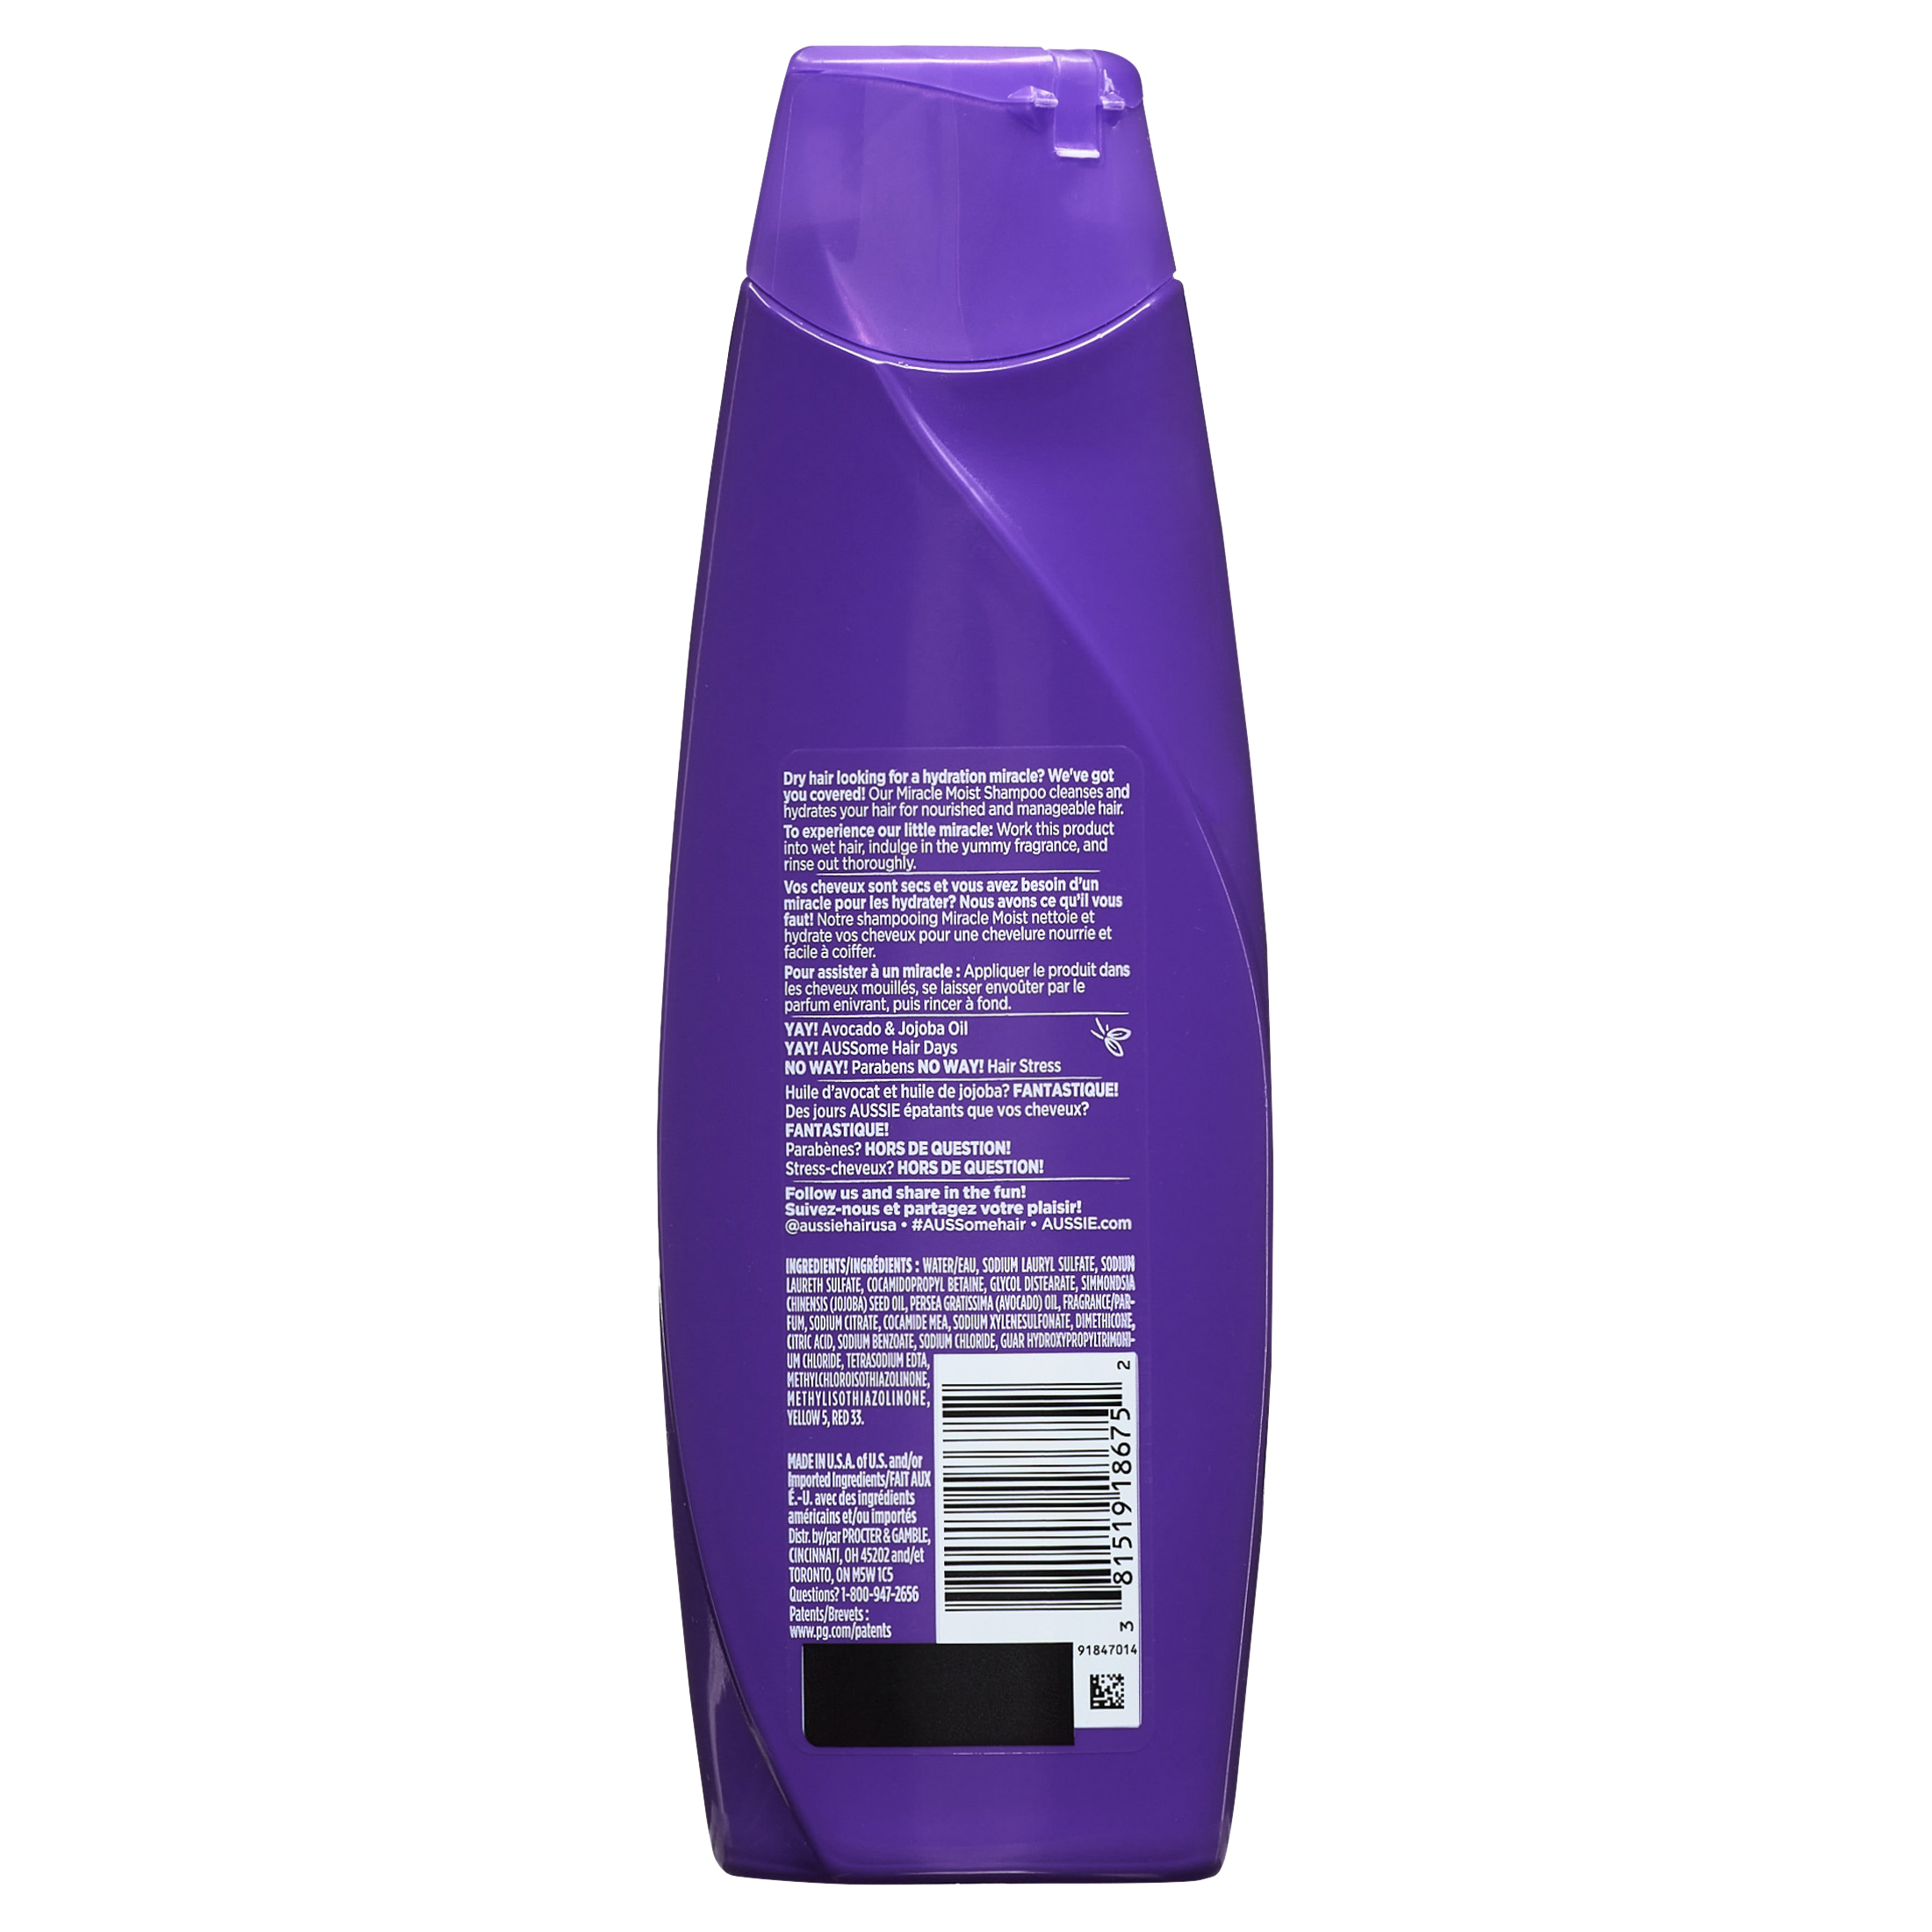 Aussie Miracle Moist Shampoo for All Hair Types with Avocado, Moisturizing, Paraben Free, 12.1 fl oz - image 8 of 9